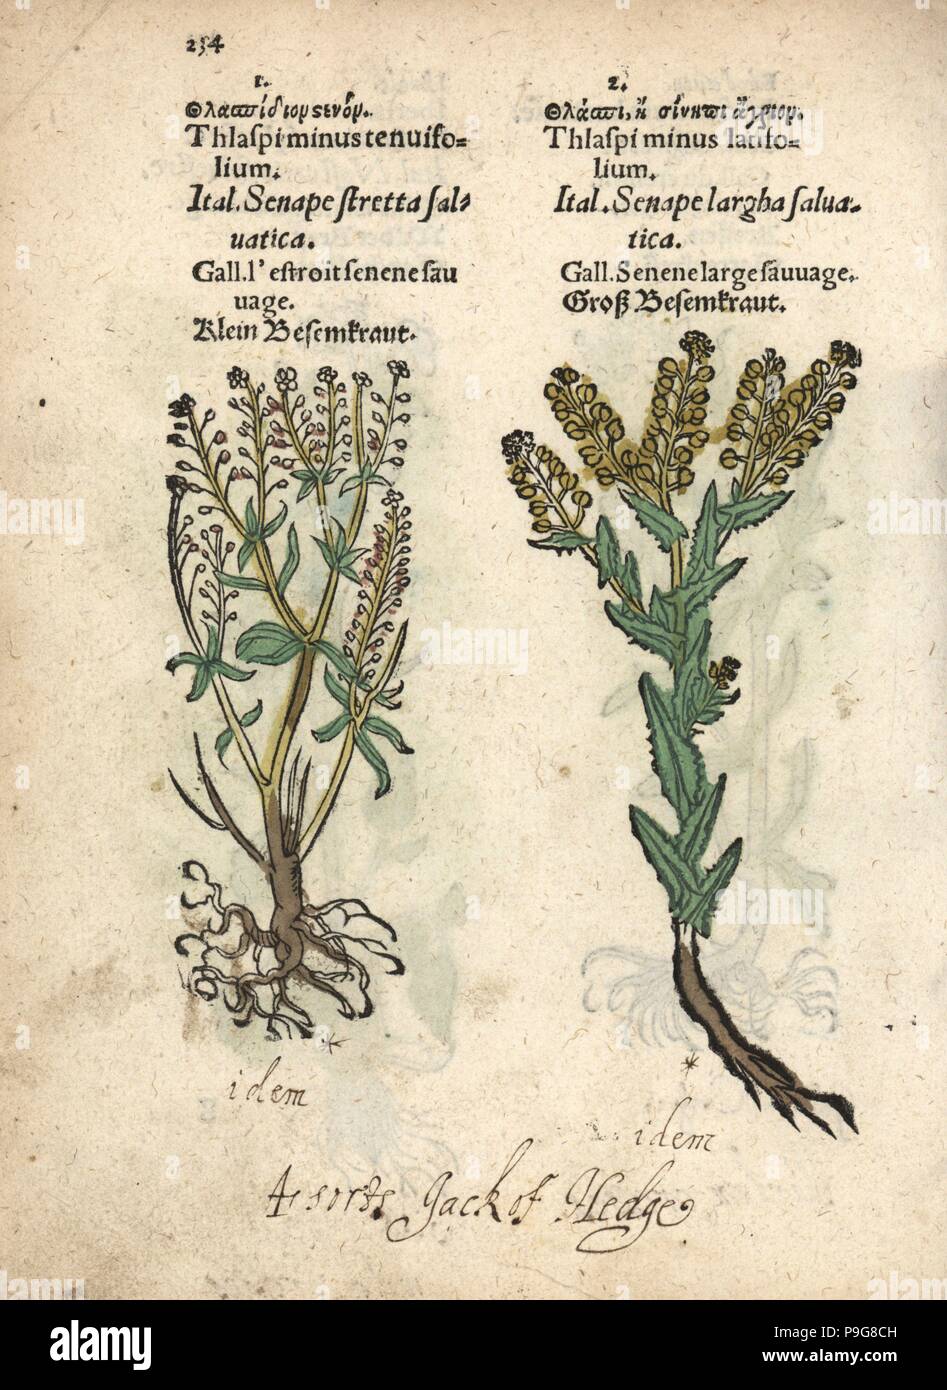 Creeping yellowcress, Rorippa sylvestris, and pepperwort, Lepidium campestre. Thlaspi minus tenuifolium, Thlaspi minus latifolium. Handcoloured woodblock engraving of a botanical illustration from Adam Lonicer's Krauterbuch, or Herbal, Frankfurt, 1557. This from a 17th century pirate edition or atlas of illustrations only, with captions in Latin, Greek, French, Italian, German, and in English manuscript. Stock Photo